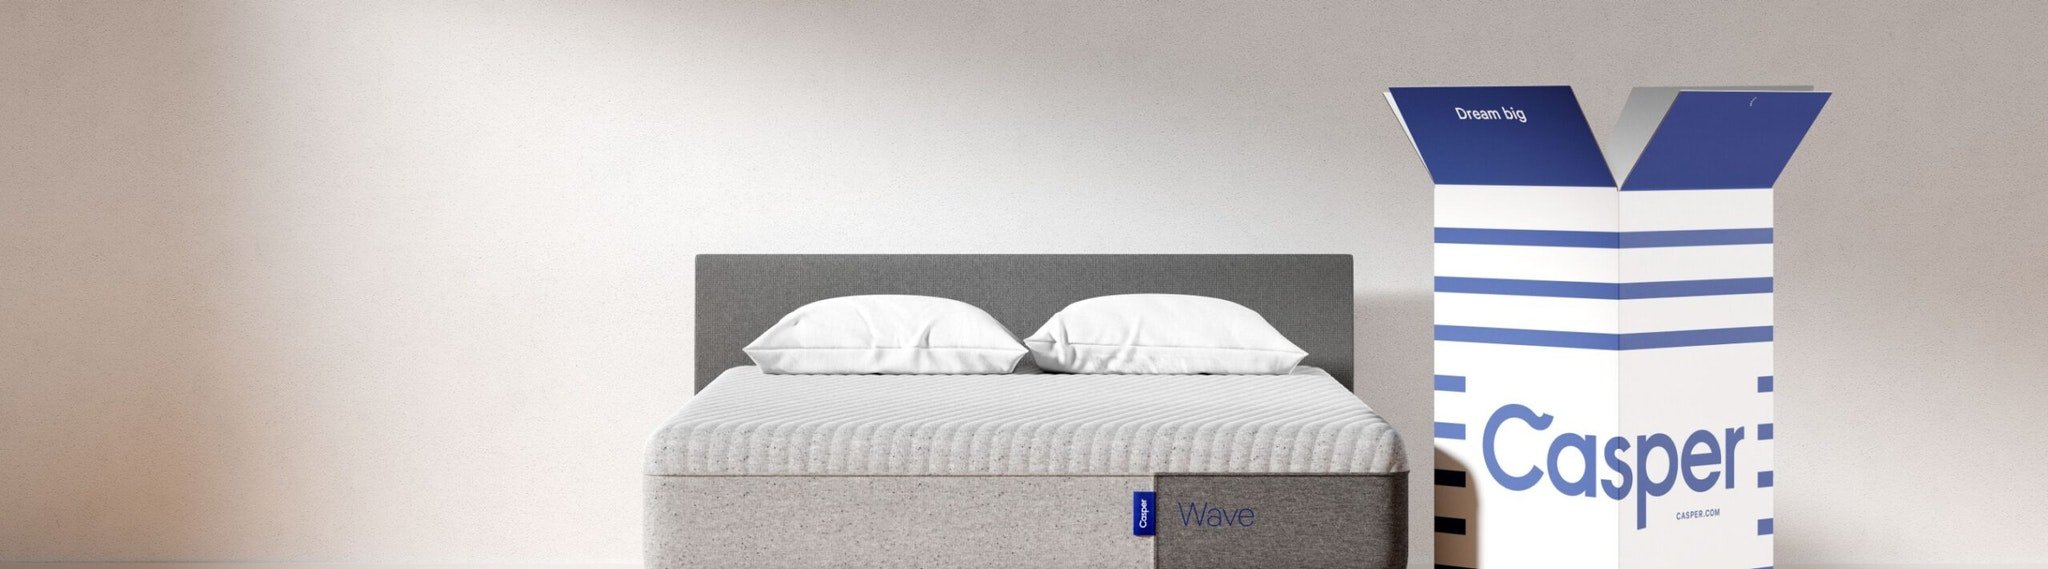 How Often Should You Replace Your Mattress?